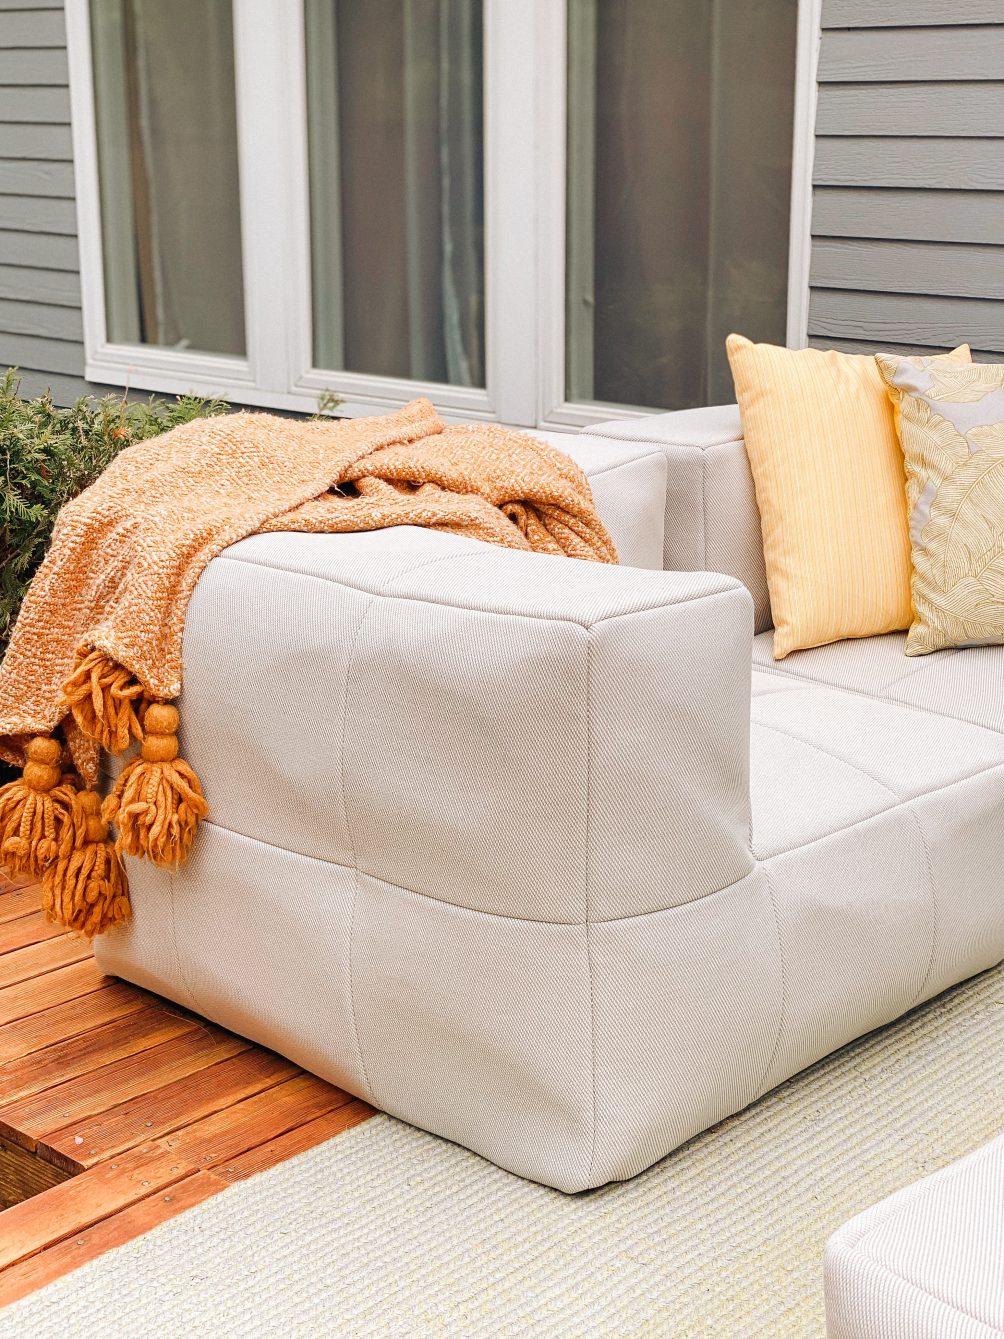 backyard deck design with Article furniture for summer in quarantine